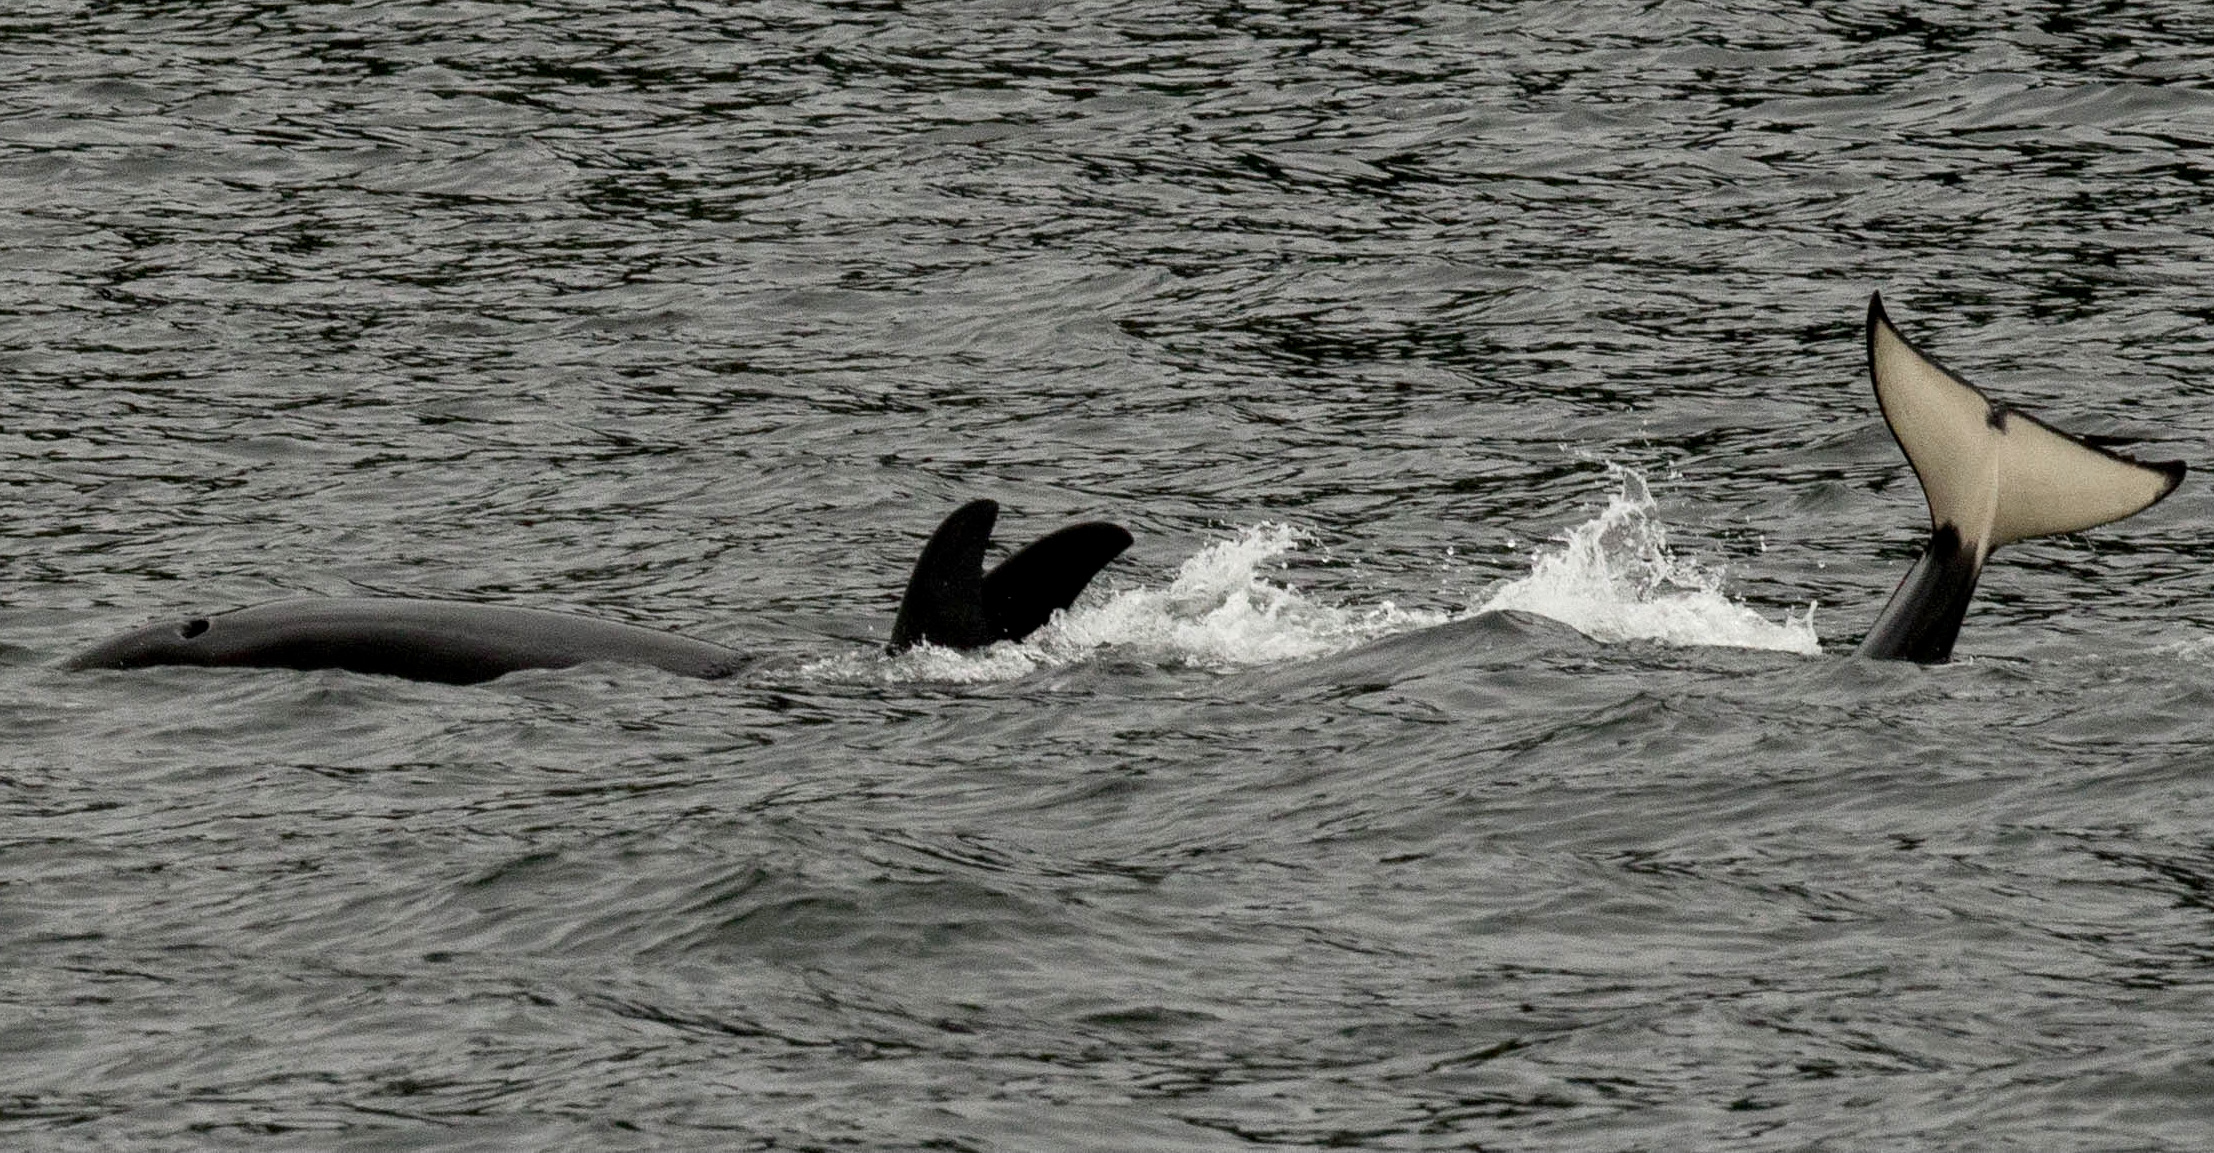 Young Orca calf playing